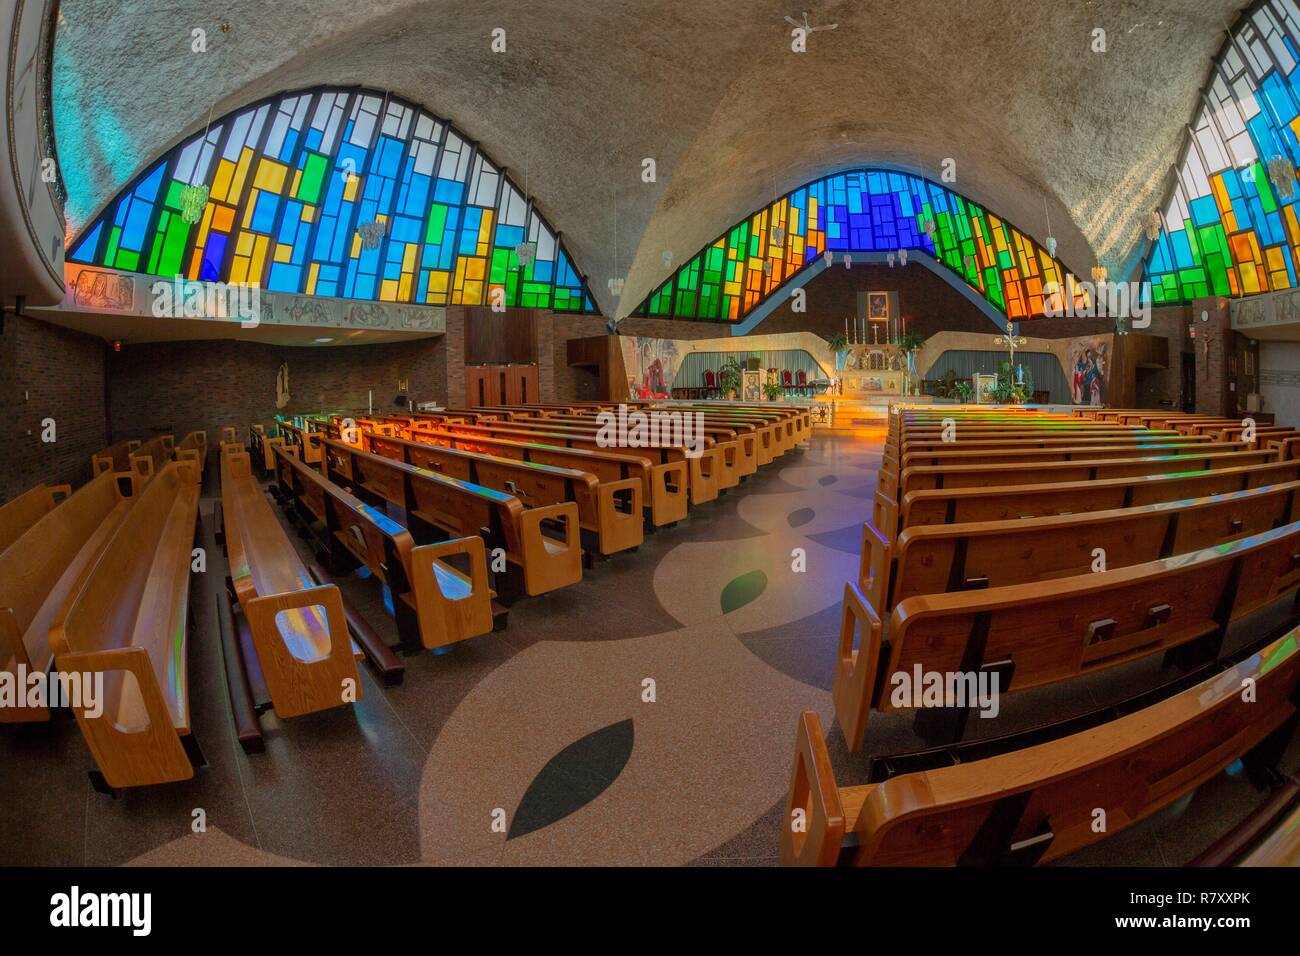 Canada, Quebec province, Montreal, Religious Heritage, Church of Our Lady of Pompei of the Italian Community of Montreal Stock Photo